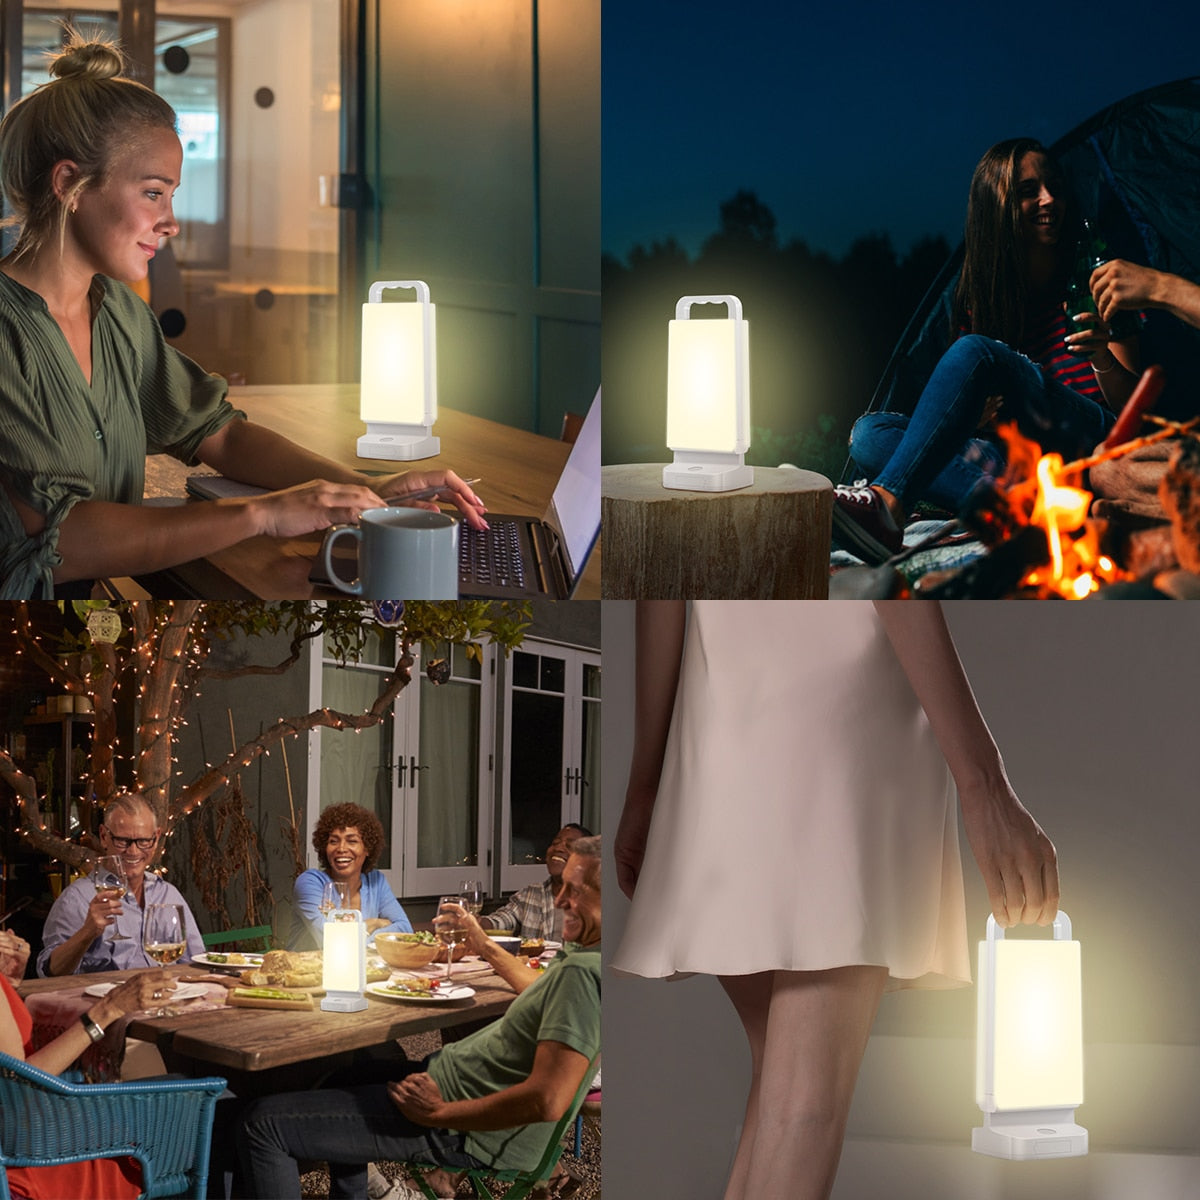 Solar LED Light Outdoor Camping Light Rechargeable Dimmable LED Camping Lantern Portable Emergency Light Solar Light For Hiking - lebenoutdoors